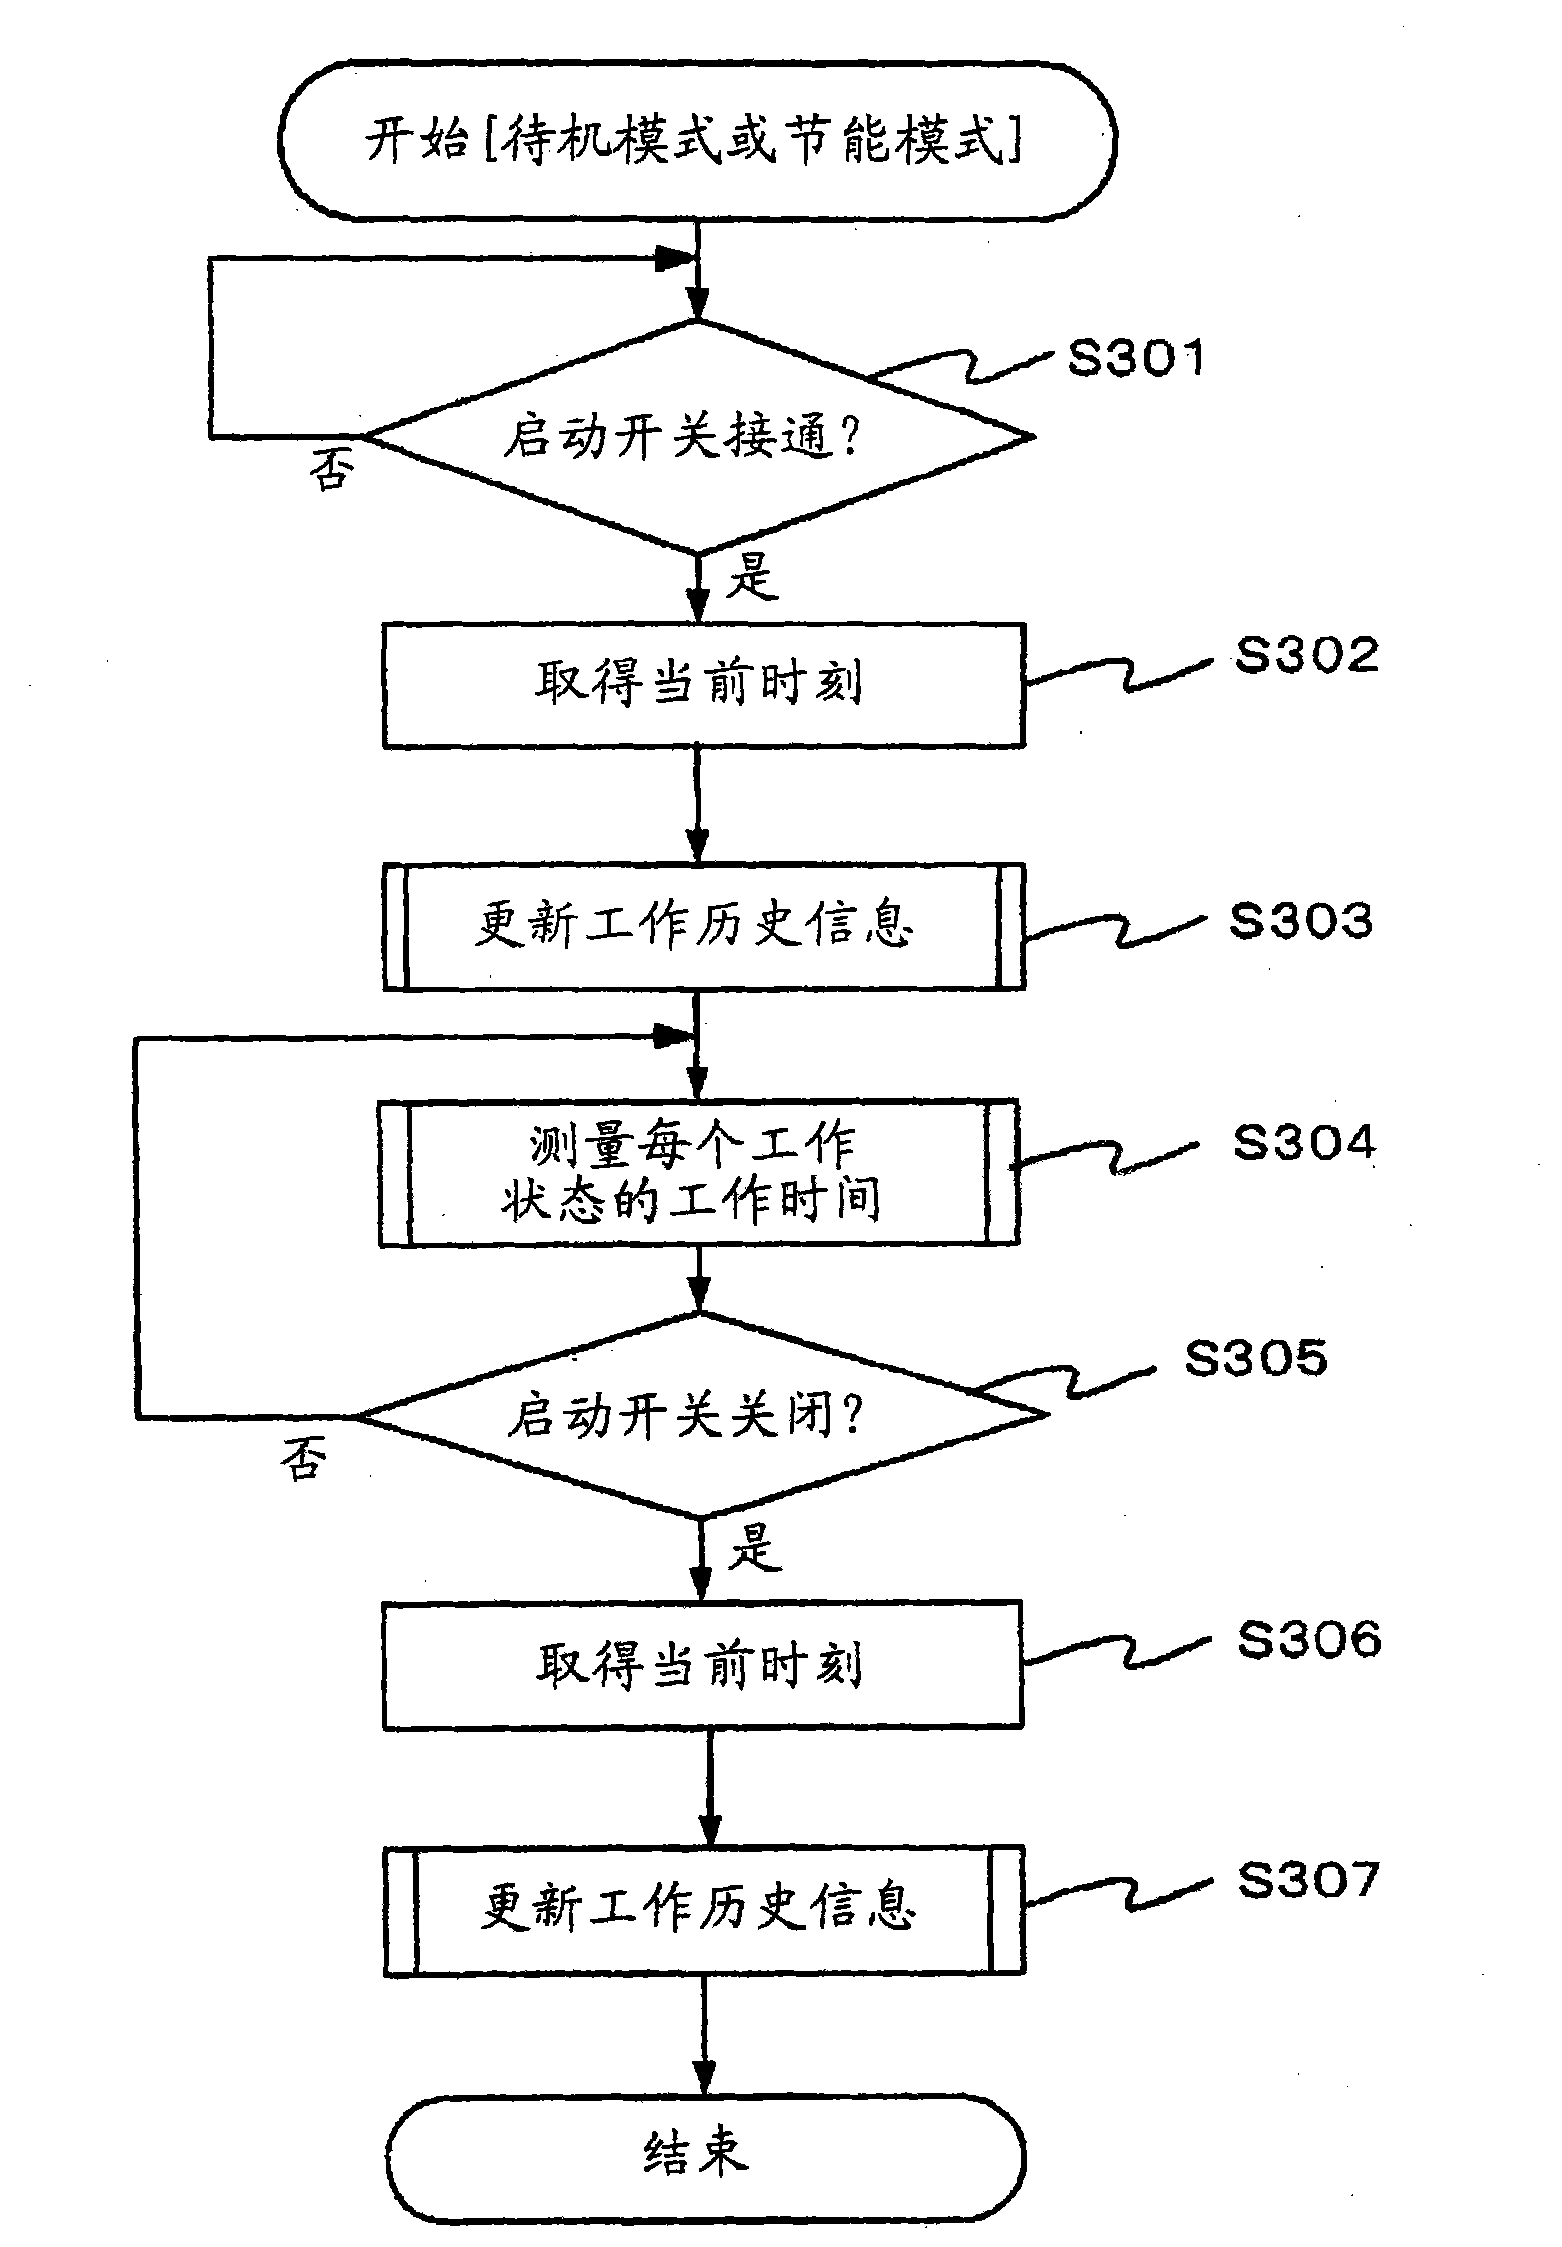 Video reproducing device, video recording/reproducing device, video reproducing method and video recording/reproducing method